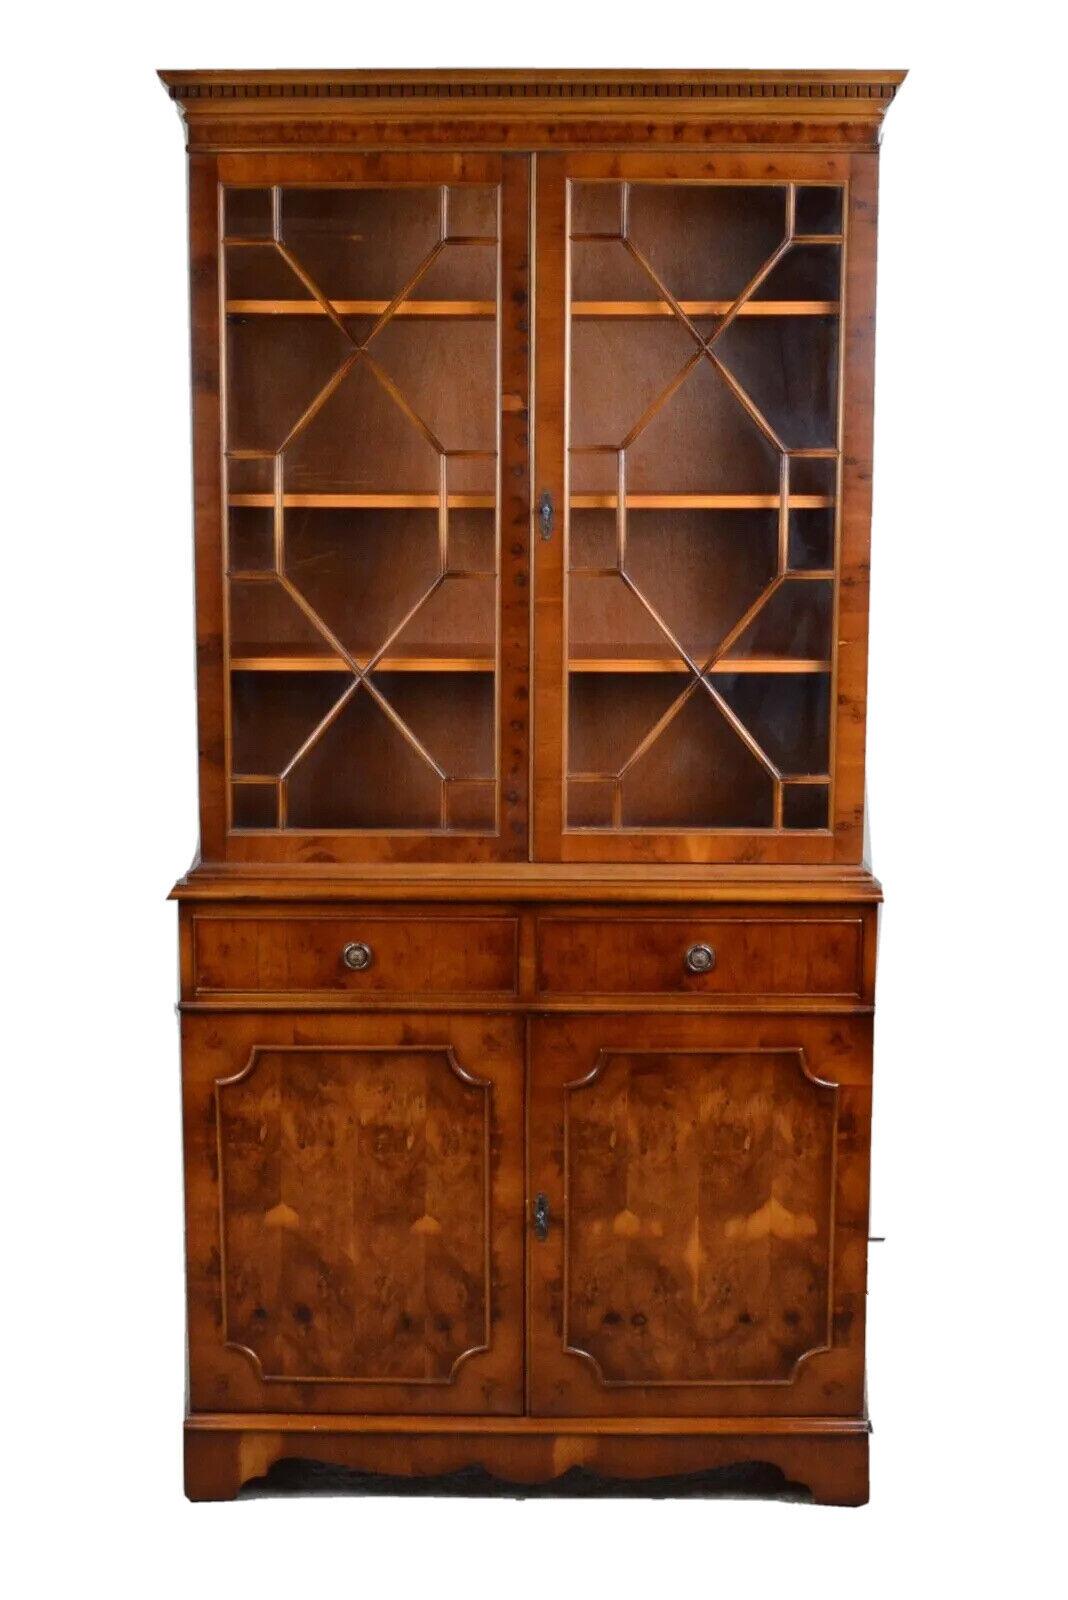 Bevan Funnell Astral Glazed Hardwood Library Display Bookcase Regency Style For Sale 5